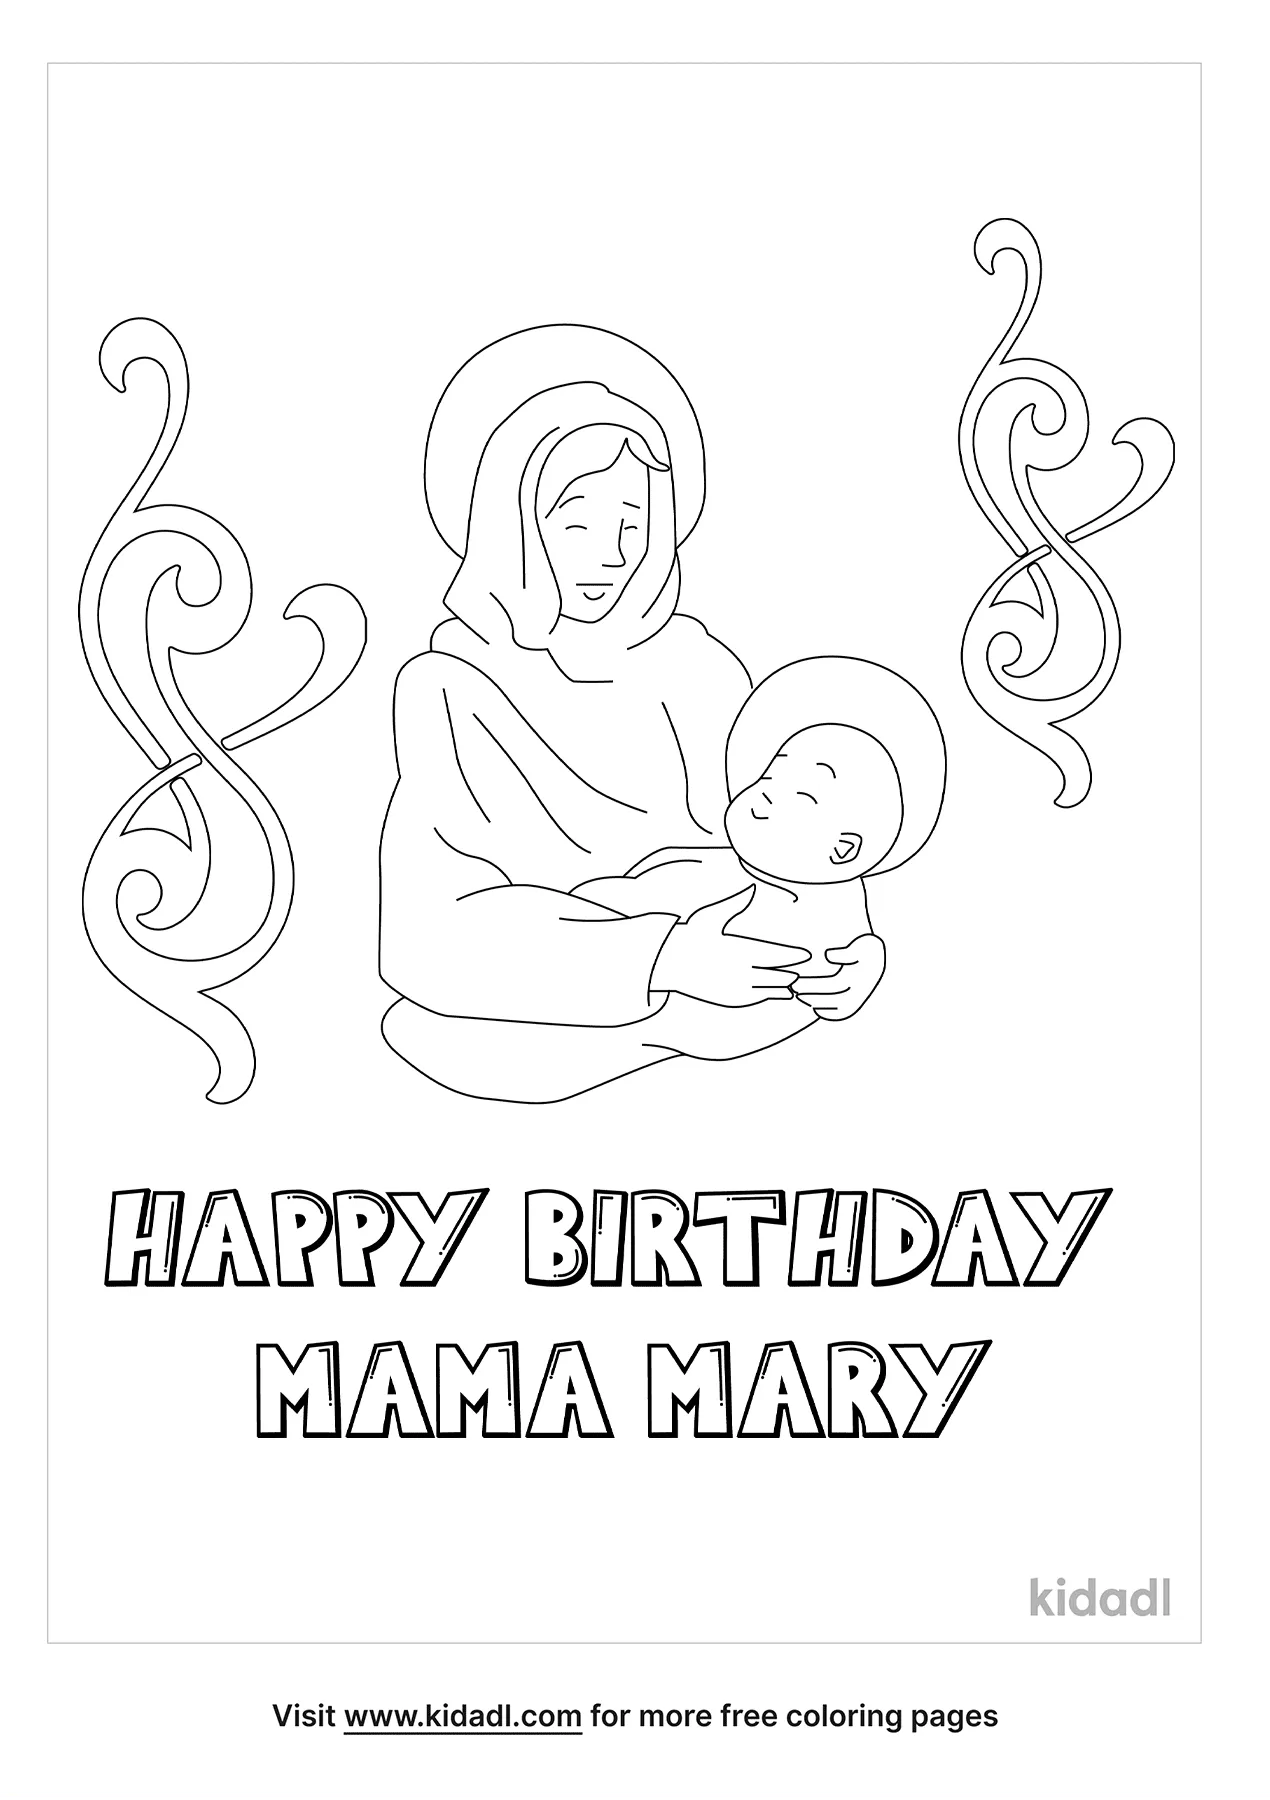 Free happy birthday mother mary coloring page coloring page printables